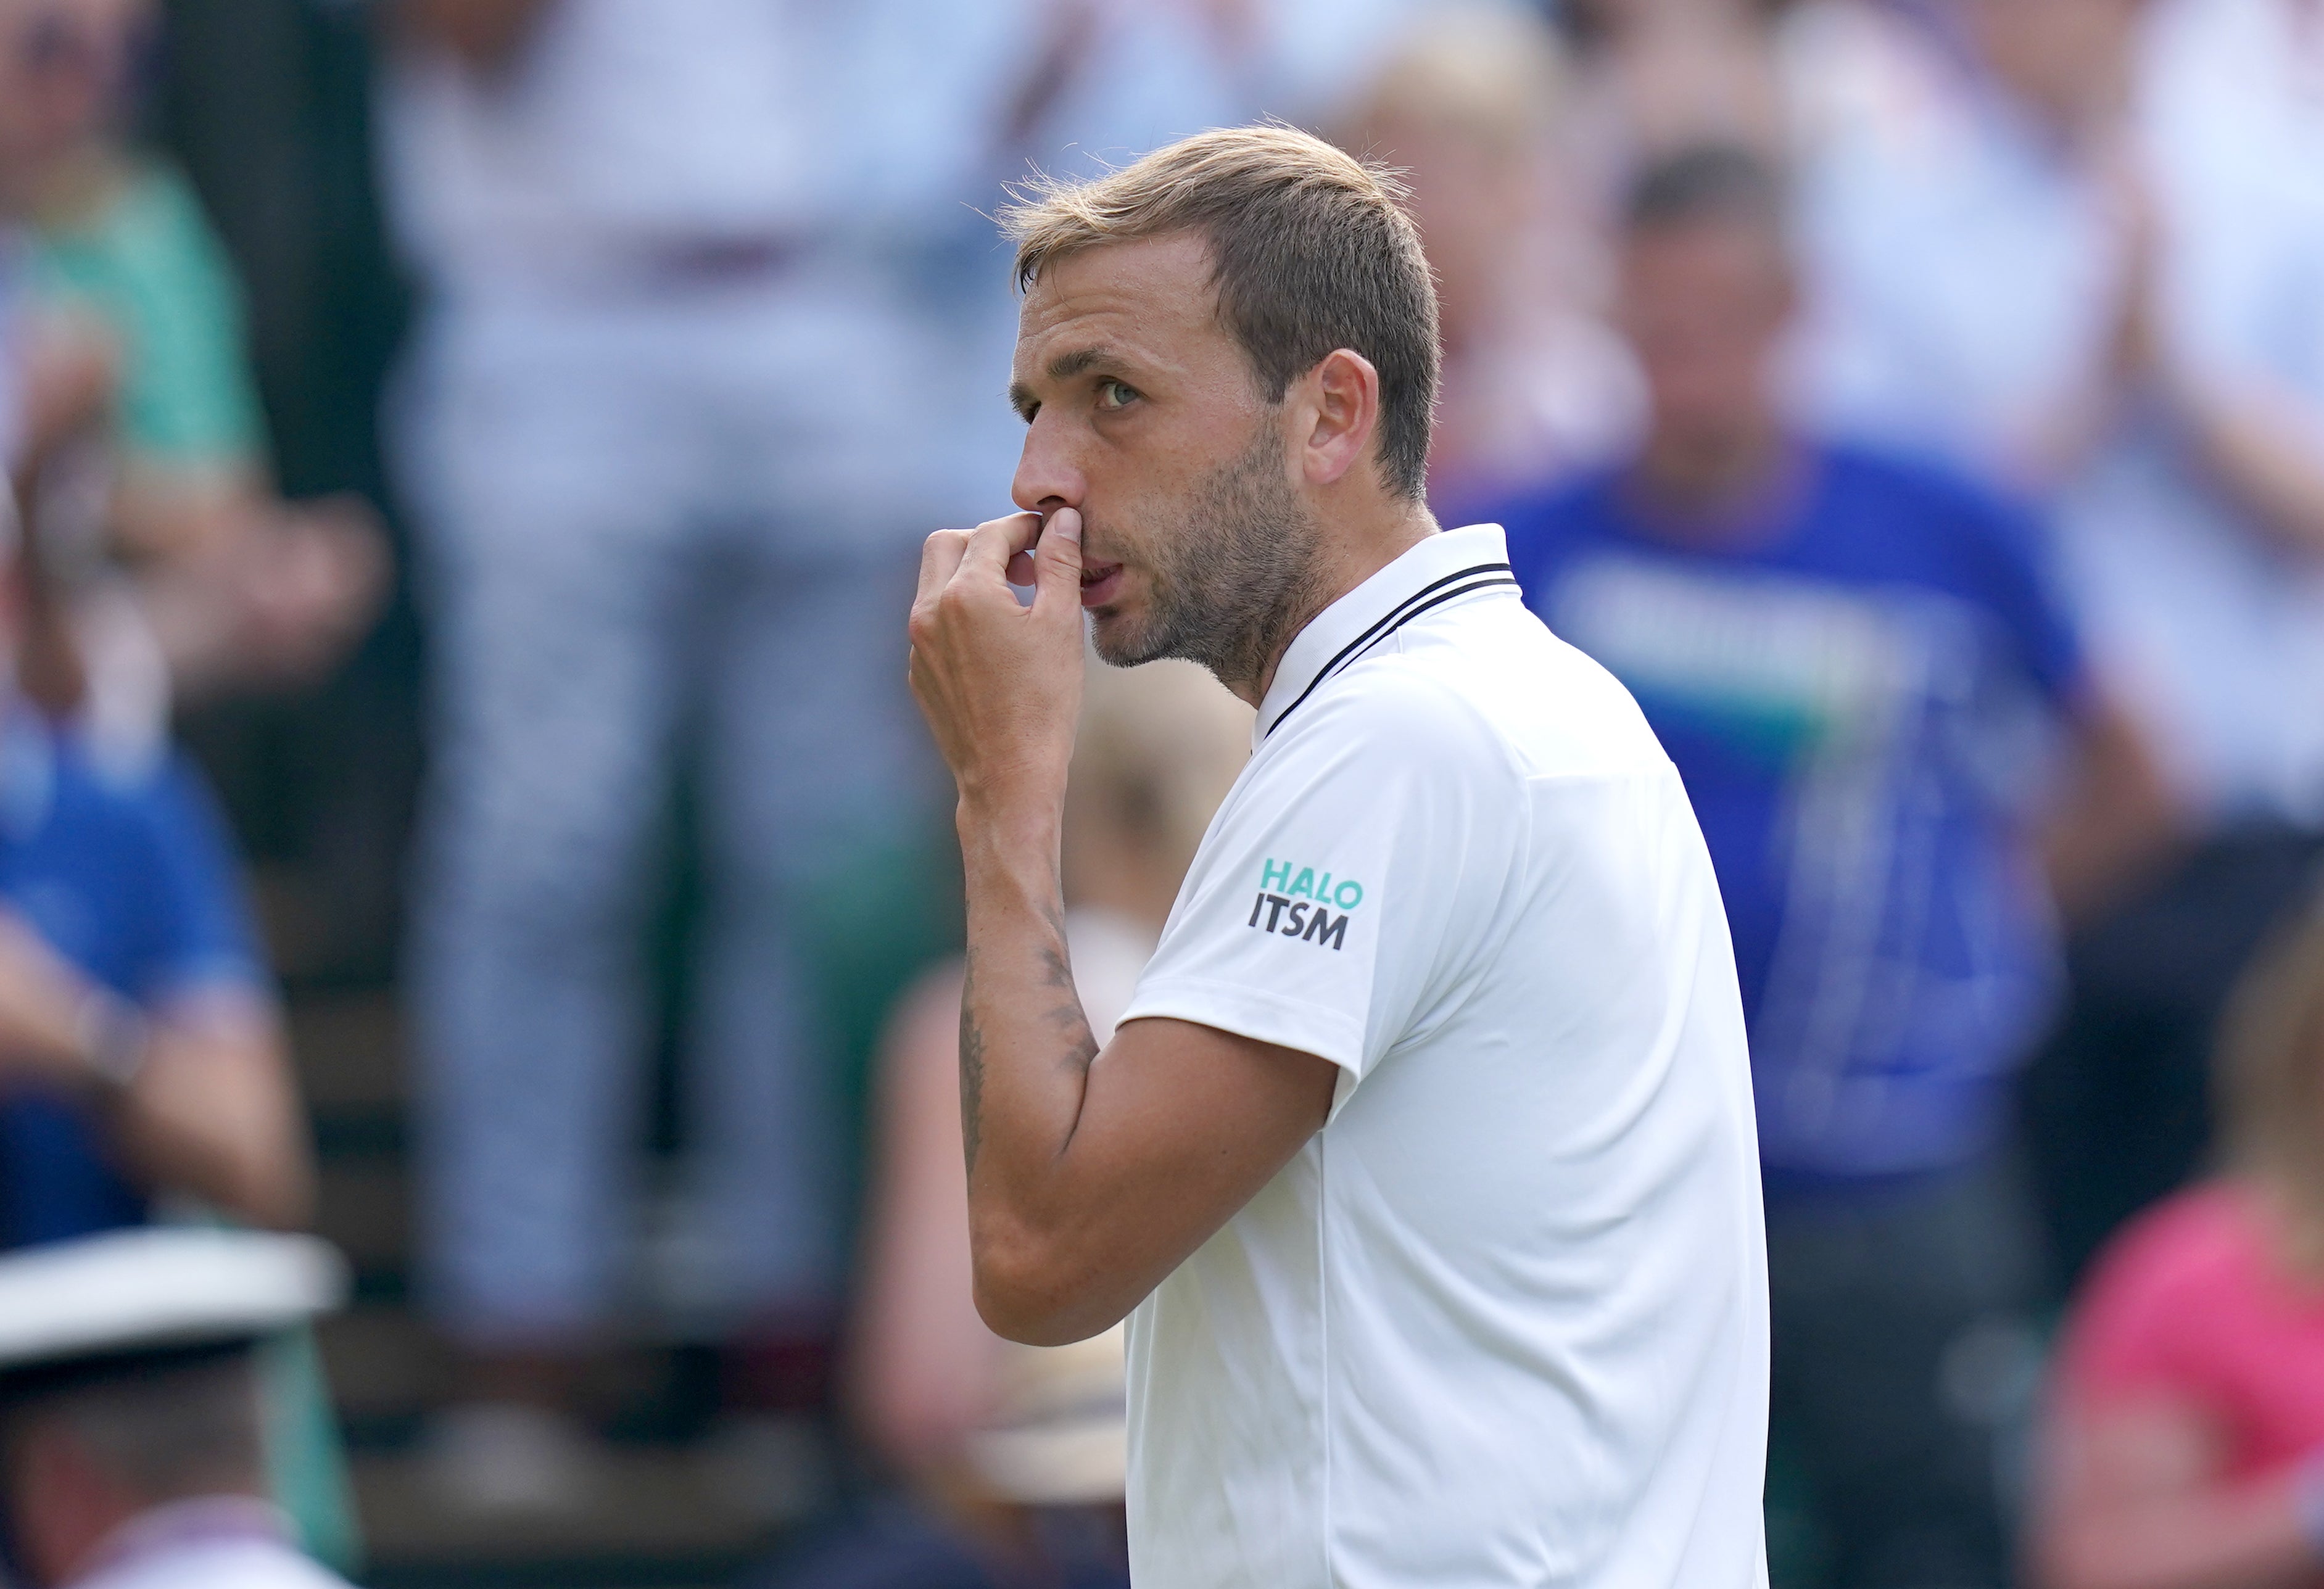 Dan Evans, pictured, is out of Wimbledon after a third-round loss to Sebastian Korda